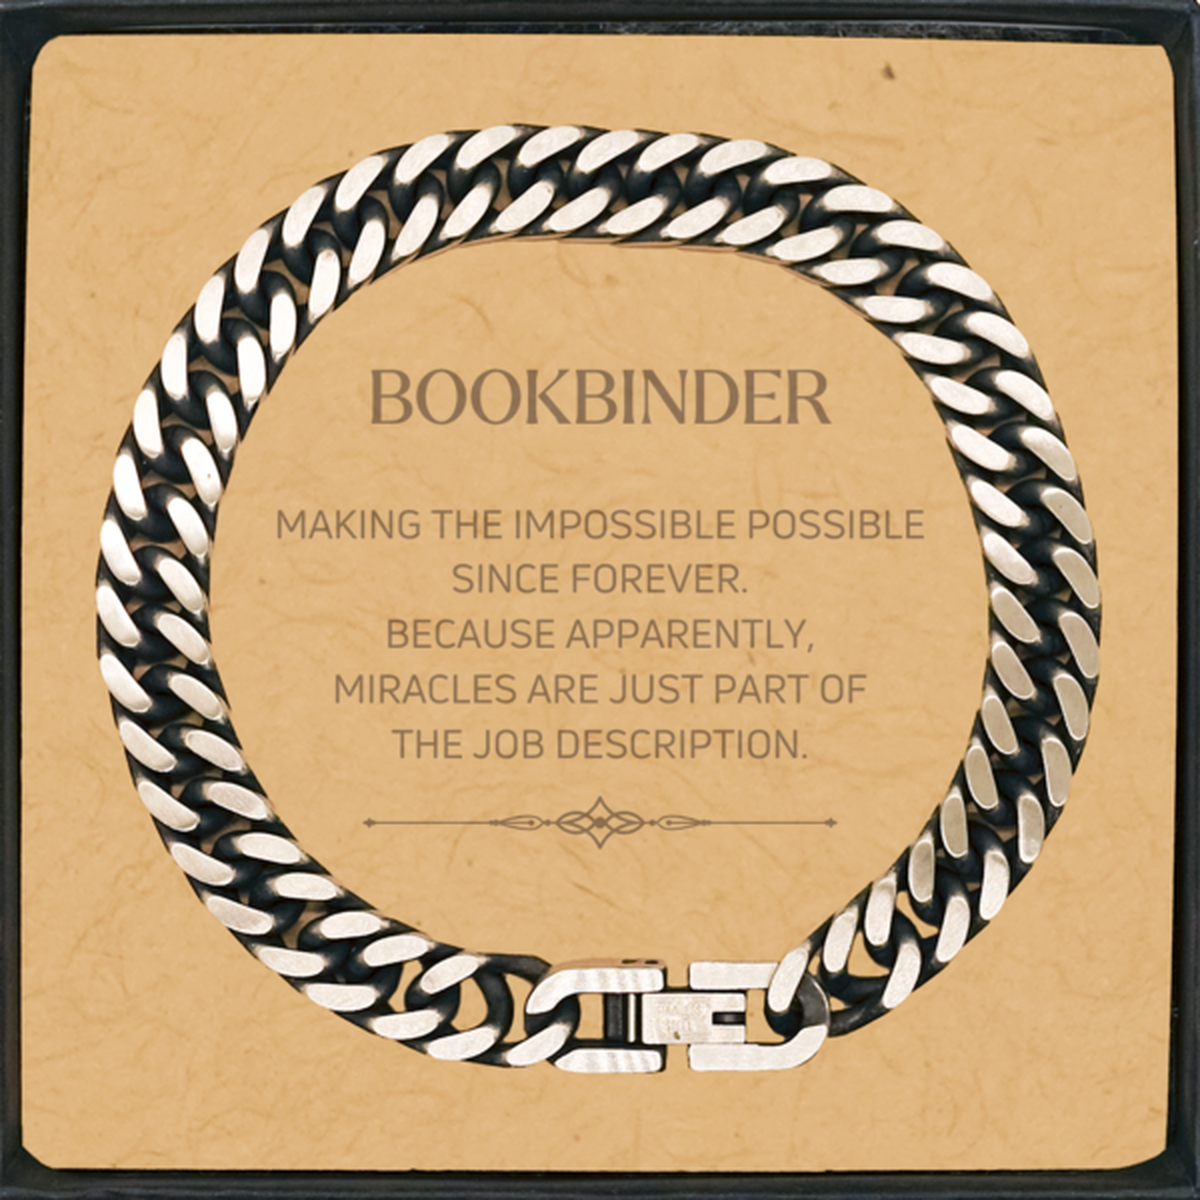 Funny Bookbinder Gifts, Miracles are just part of the job description, Inspirational Birthday Cuban Link Chain Bracelet For Bookbinder, Men, Women, Coworkers, Friends, Boss